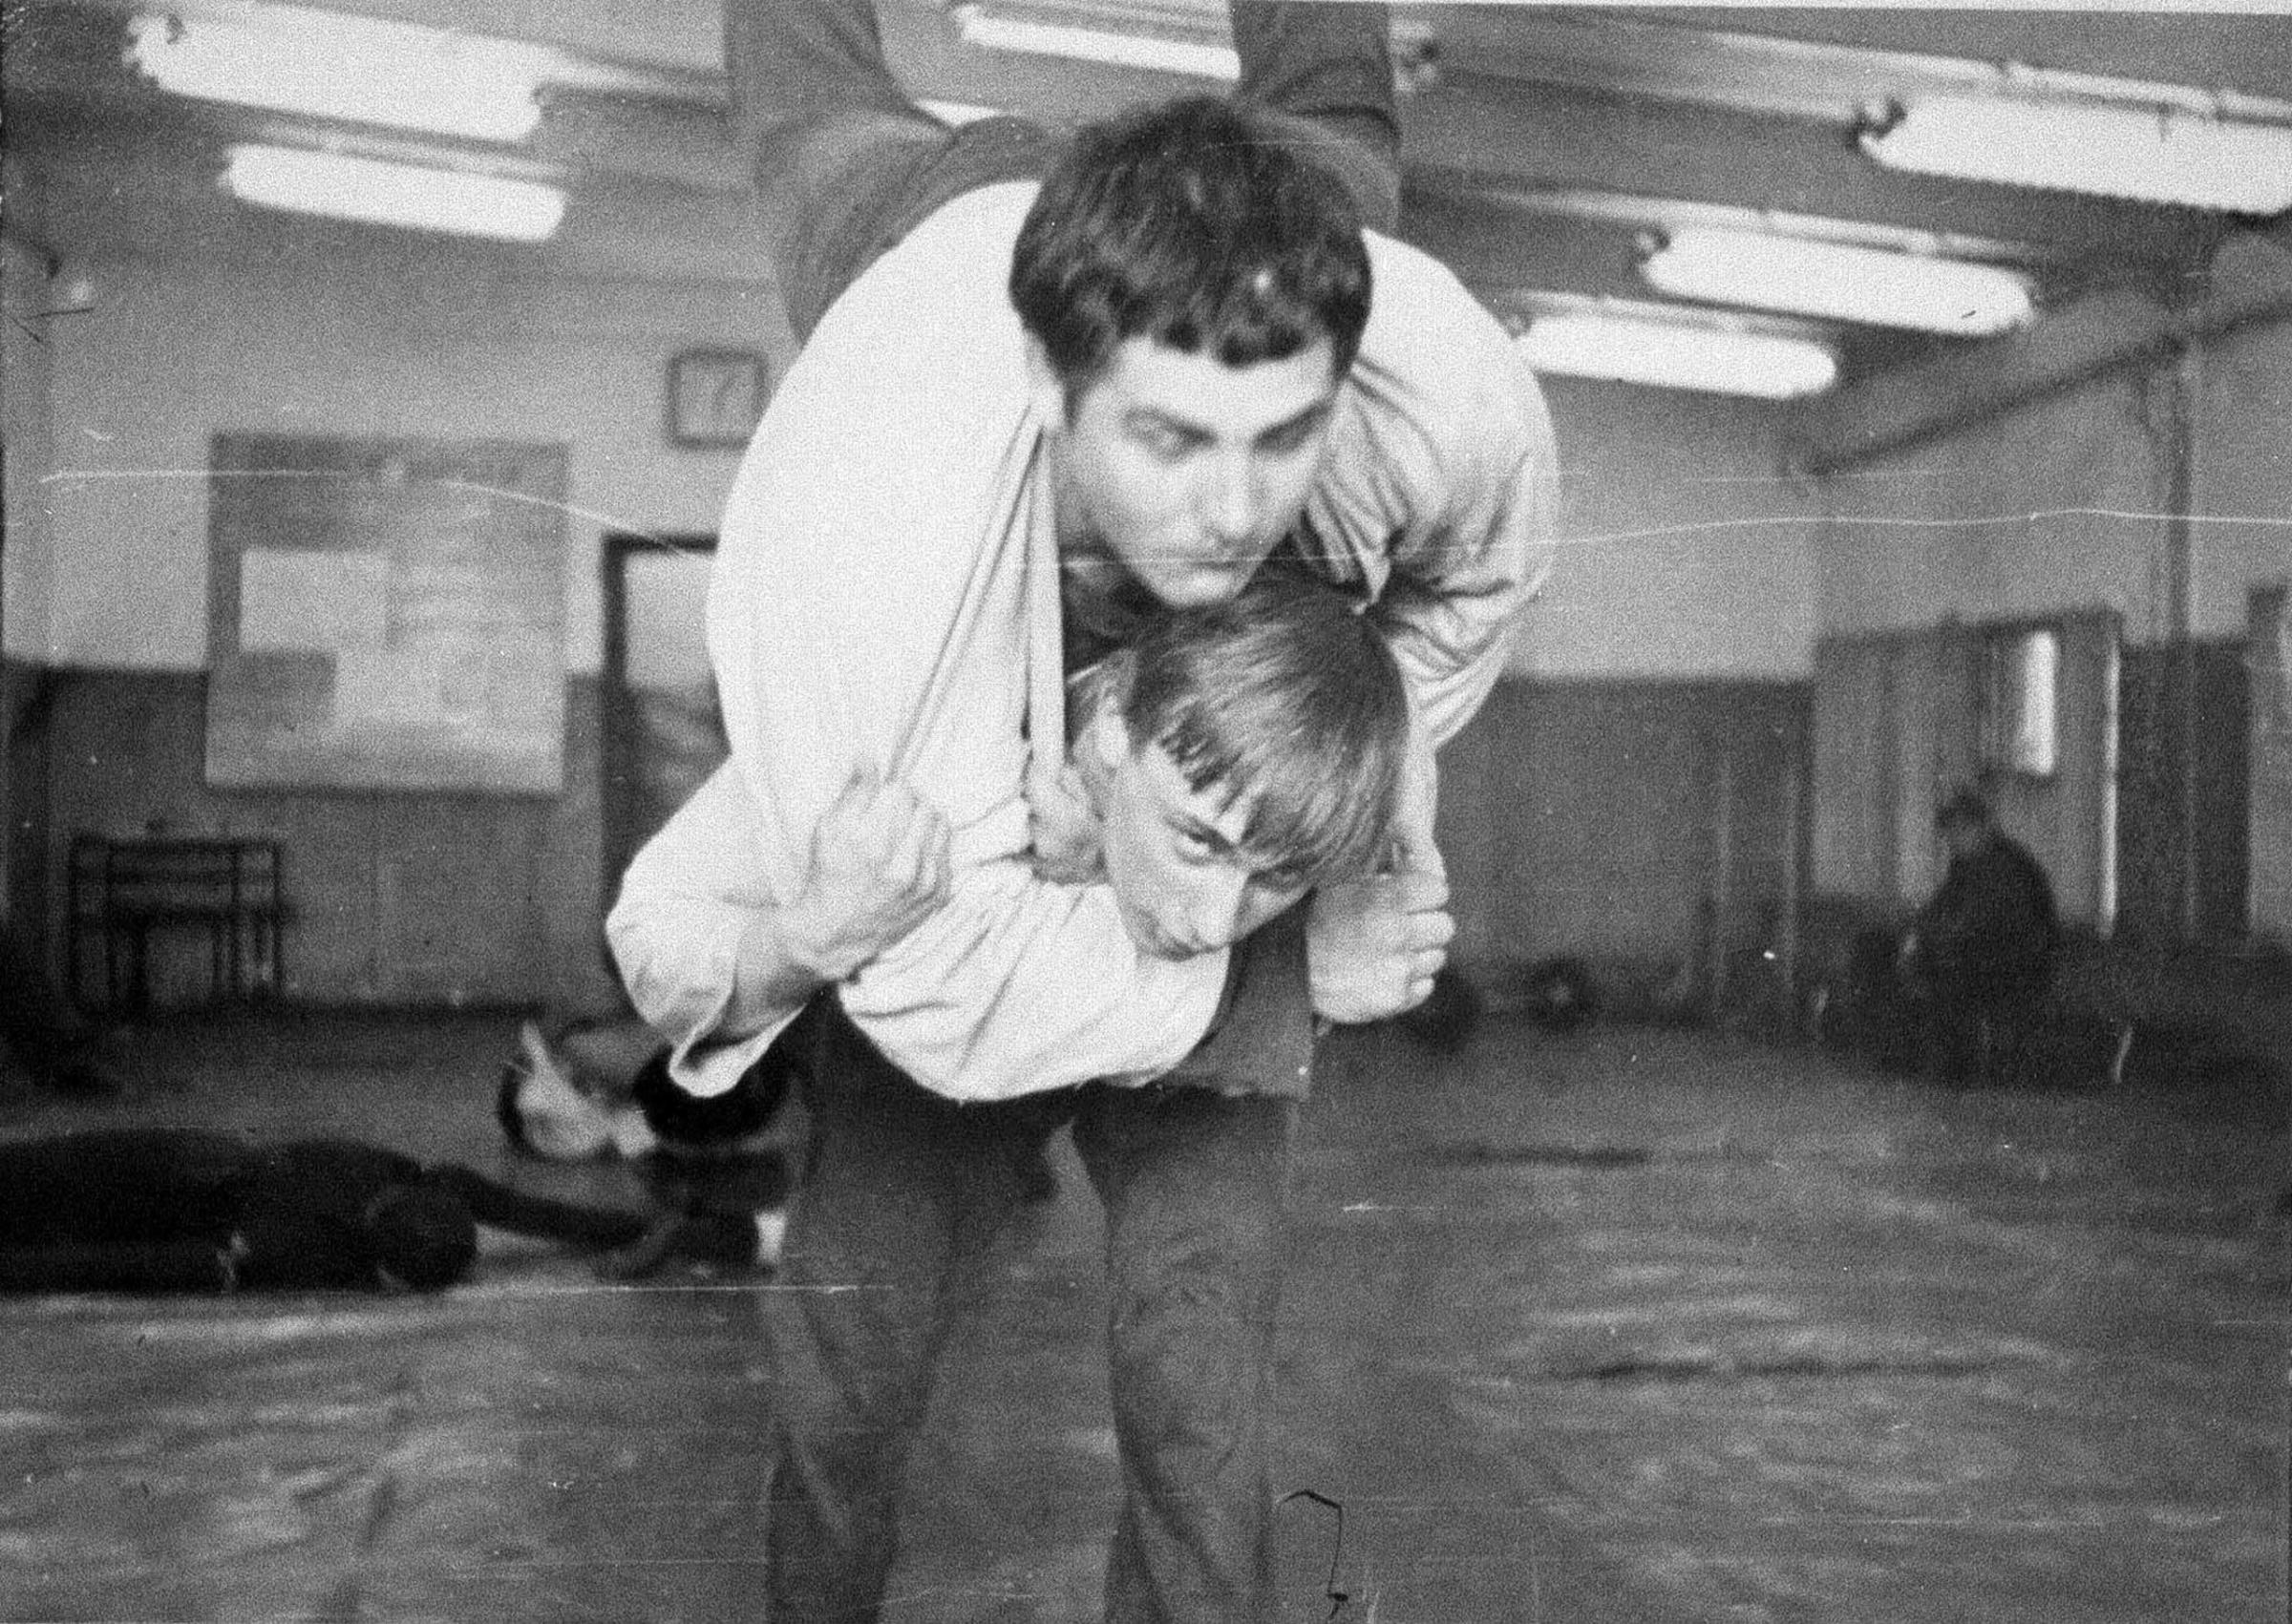 Young Vladimir Putin during judo training with fellow pupil Vassily Shestakov in St. Petersburg in 1971.